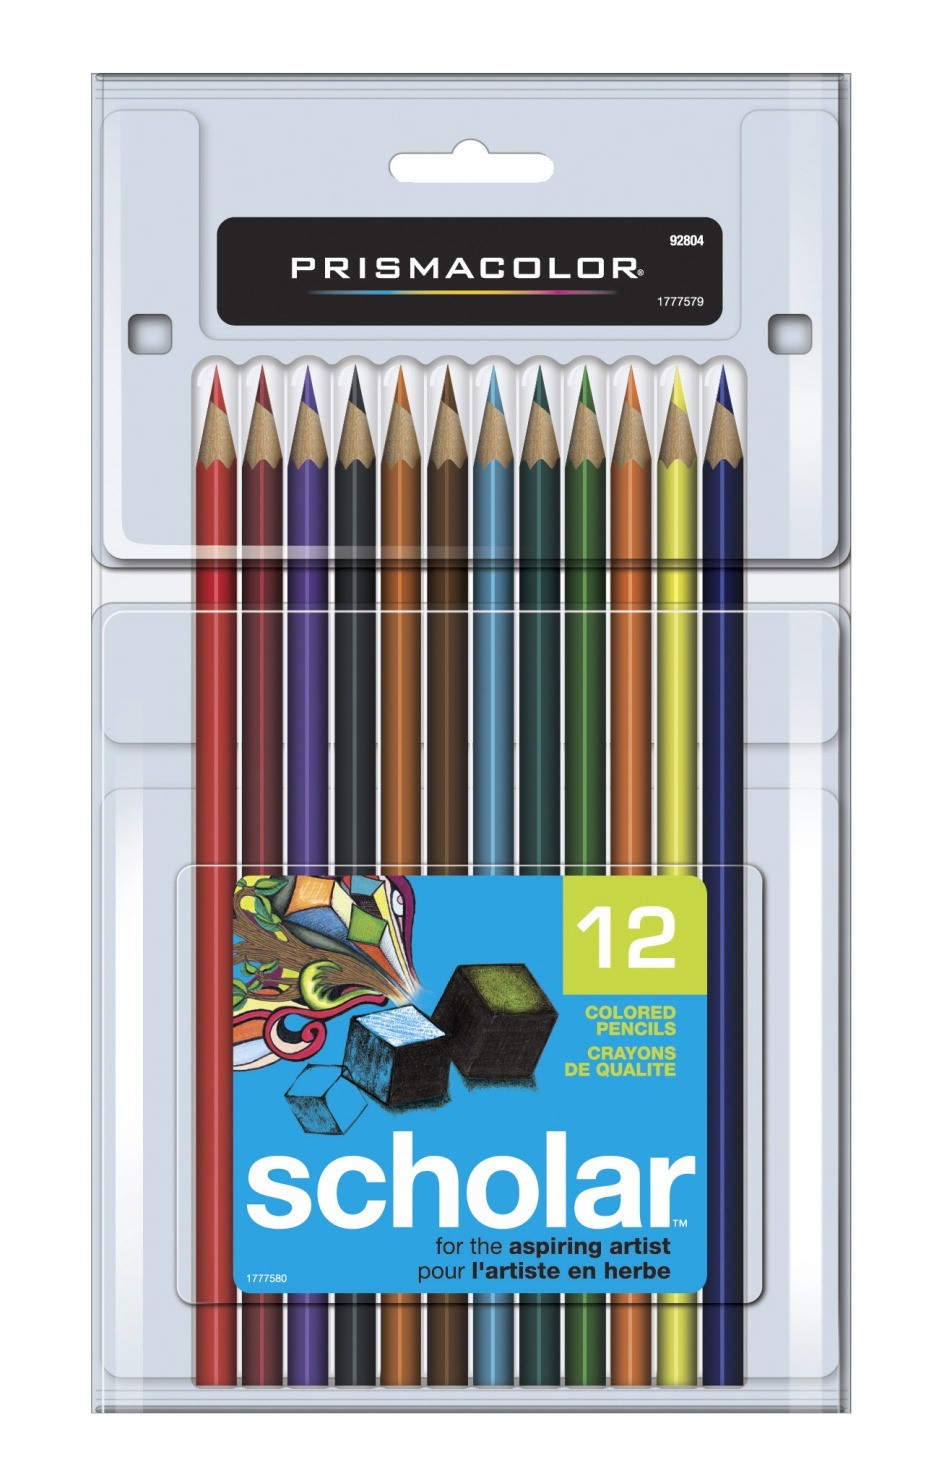 Prismacolor Scholar Non-Toxic Smooth Colored Pencil Set, Thick Tip, Assorted Color, Set of 48